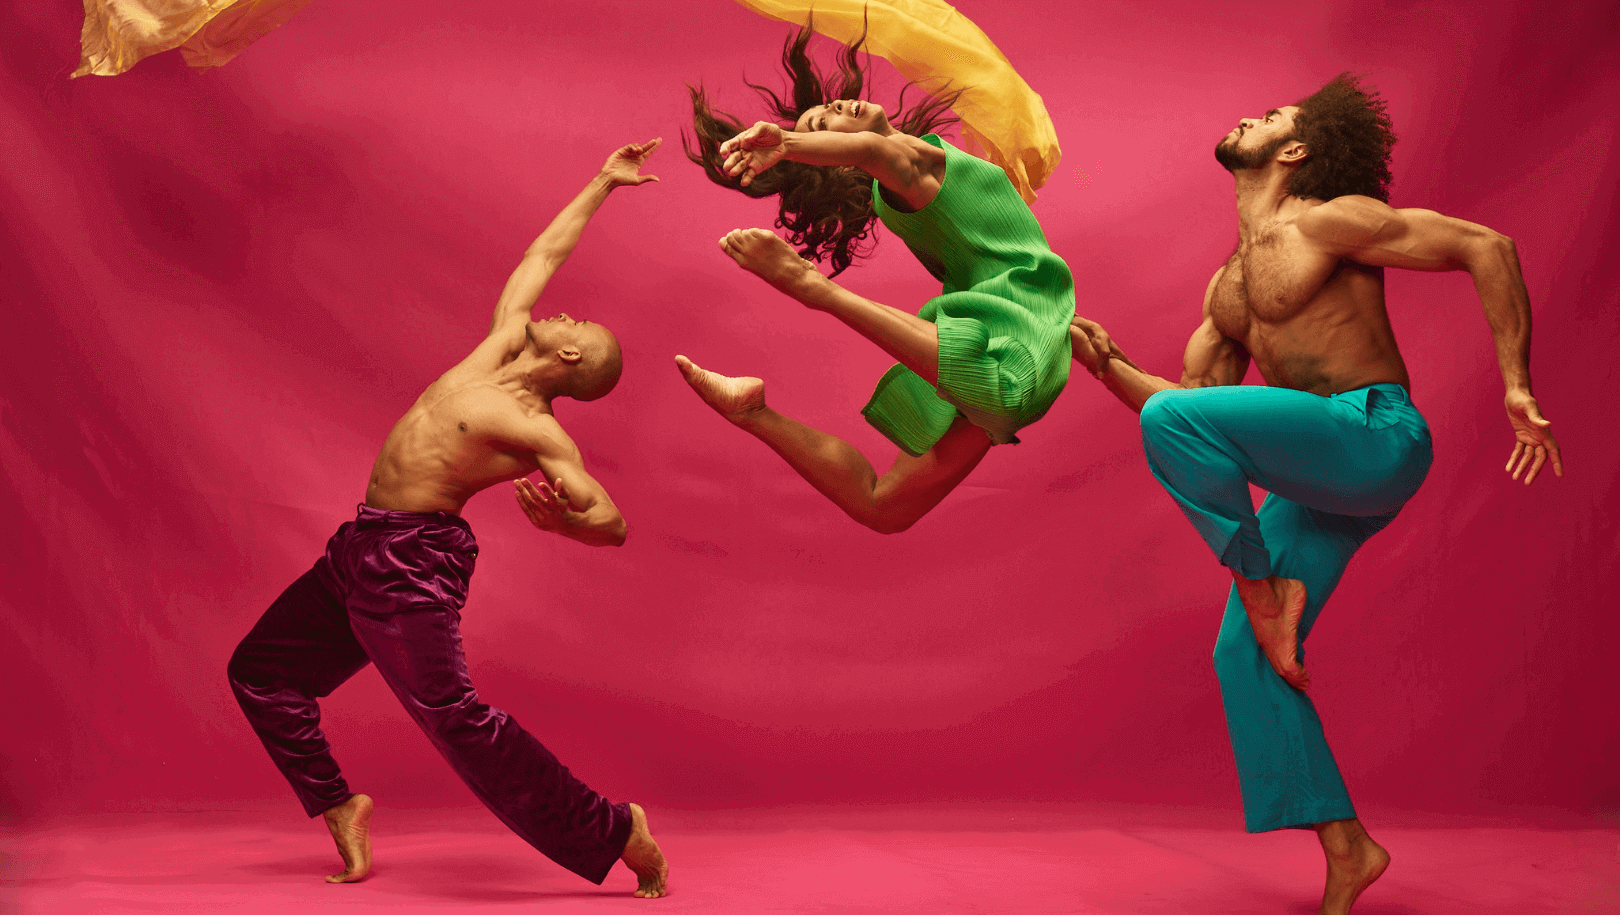 Three dancers in motion wearing colorful clothing against a pinkish red background, the center dancer leaping in the air.